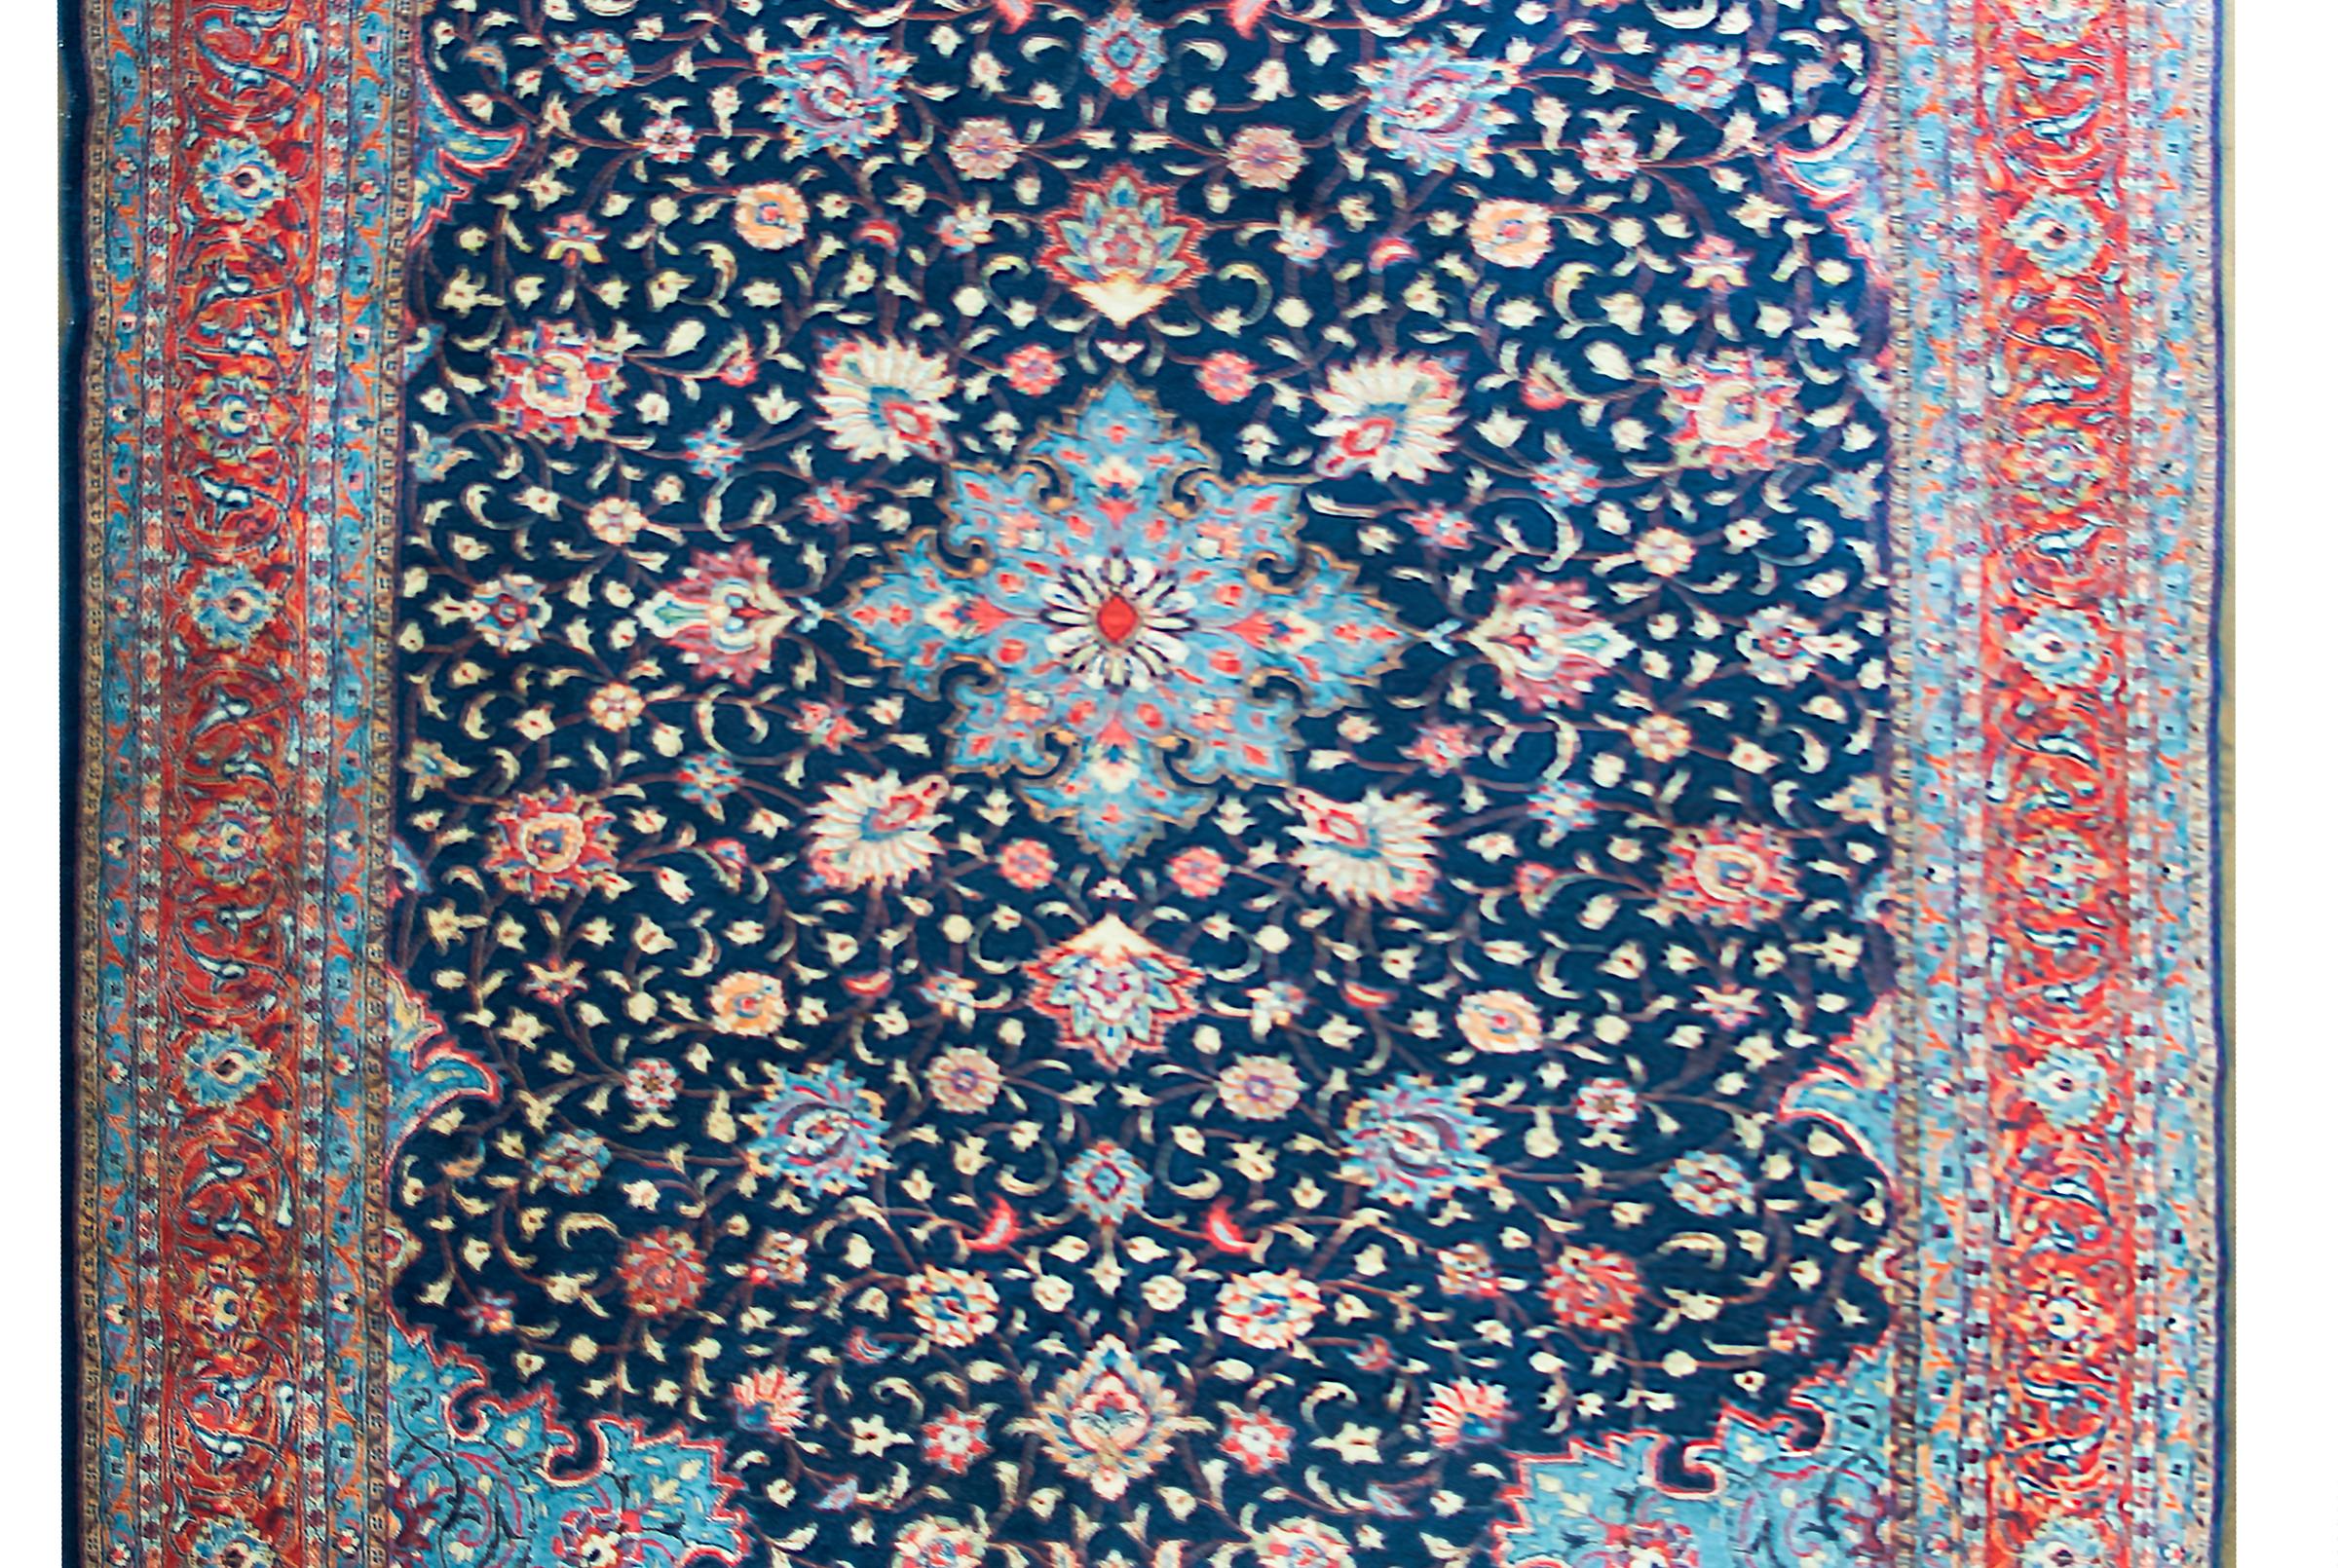 A beautiful mid-20th century Persian Sarouk rug with a central flower with trailing vines with more large flowers and leaves, surrounded by a complex border with a repeated floral and vine pattern, and all woven in light and dark indigo, crimson,